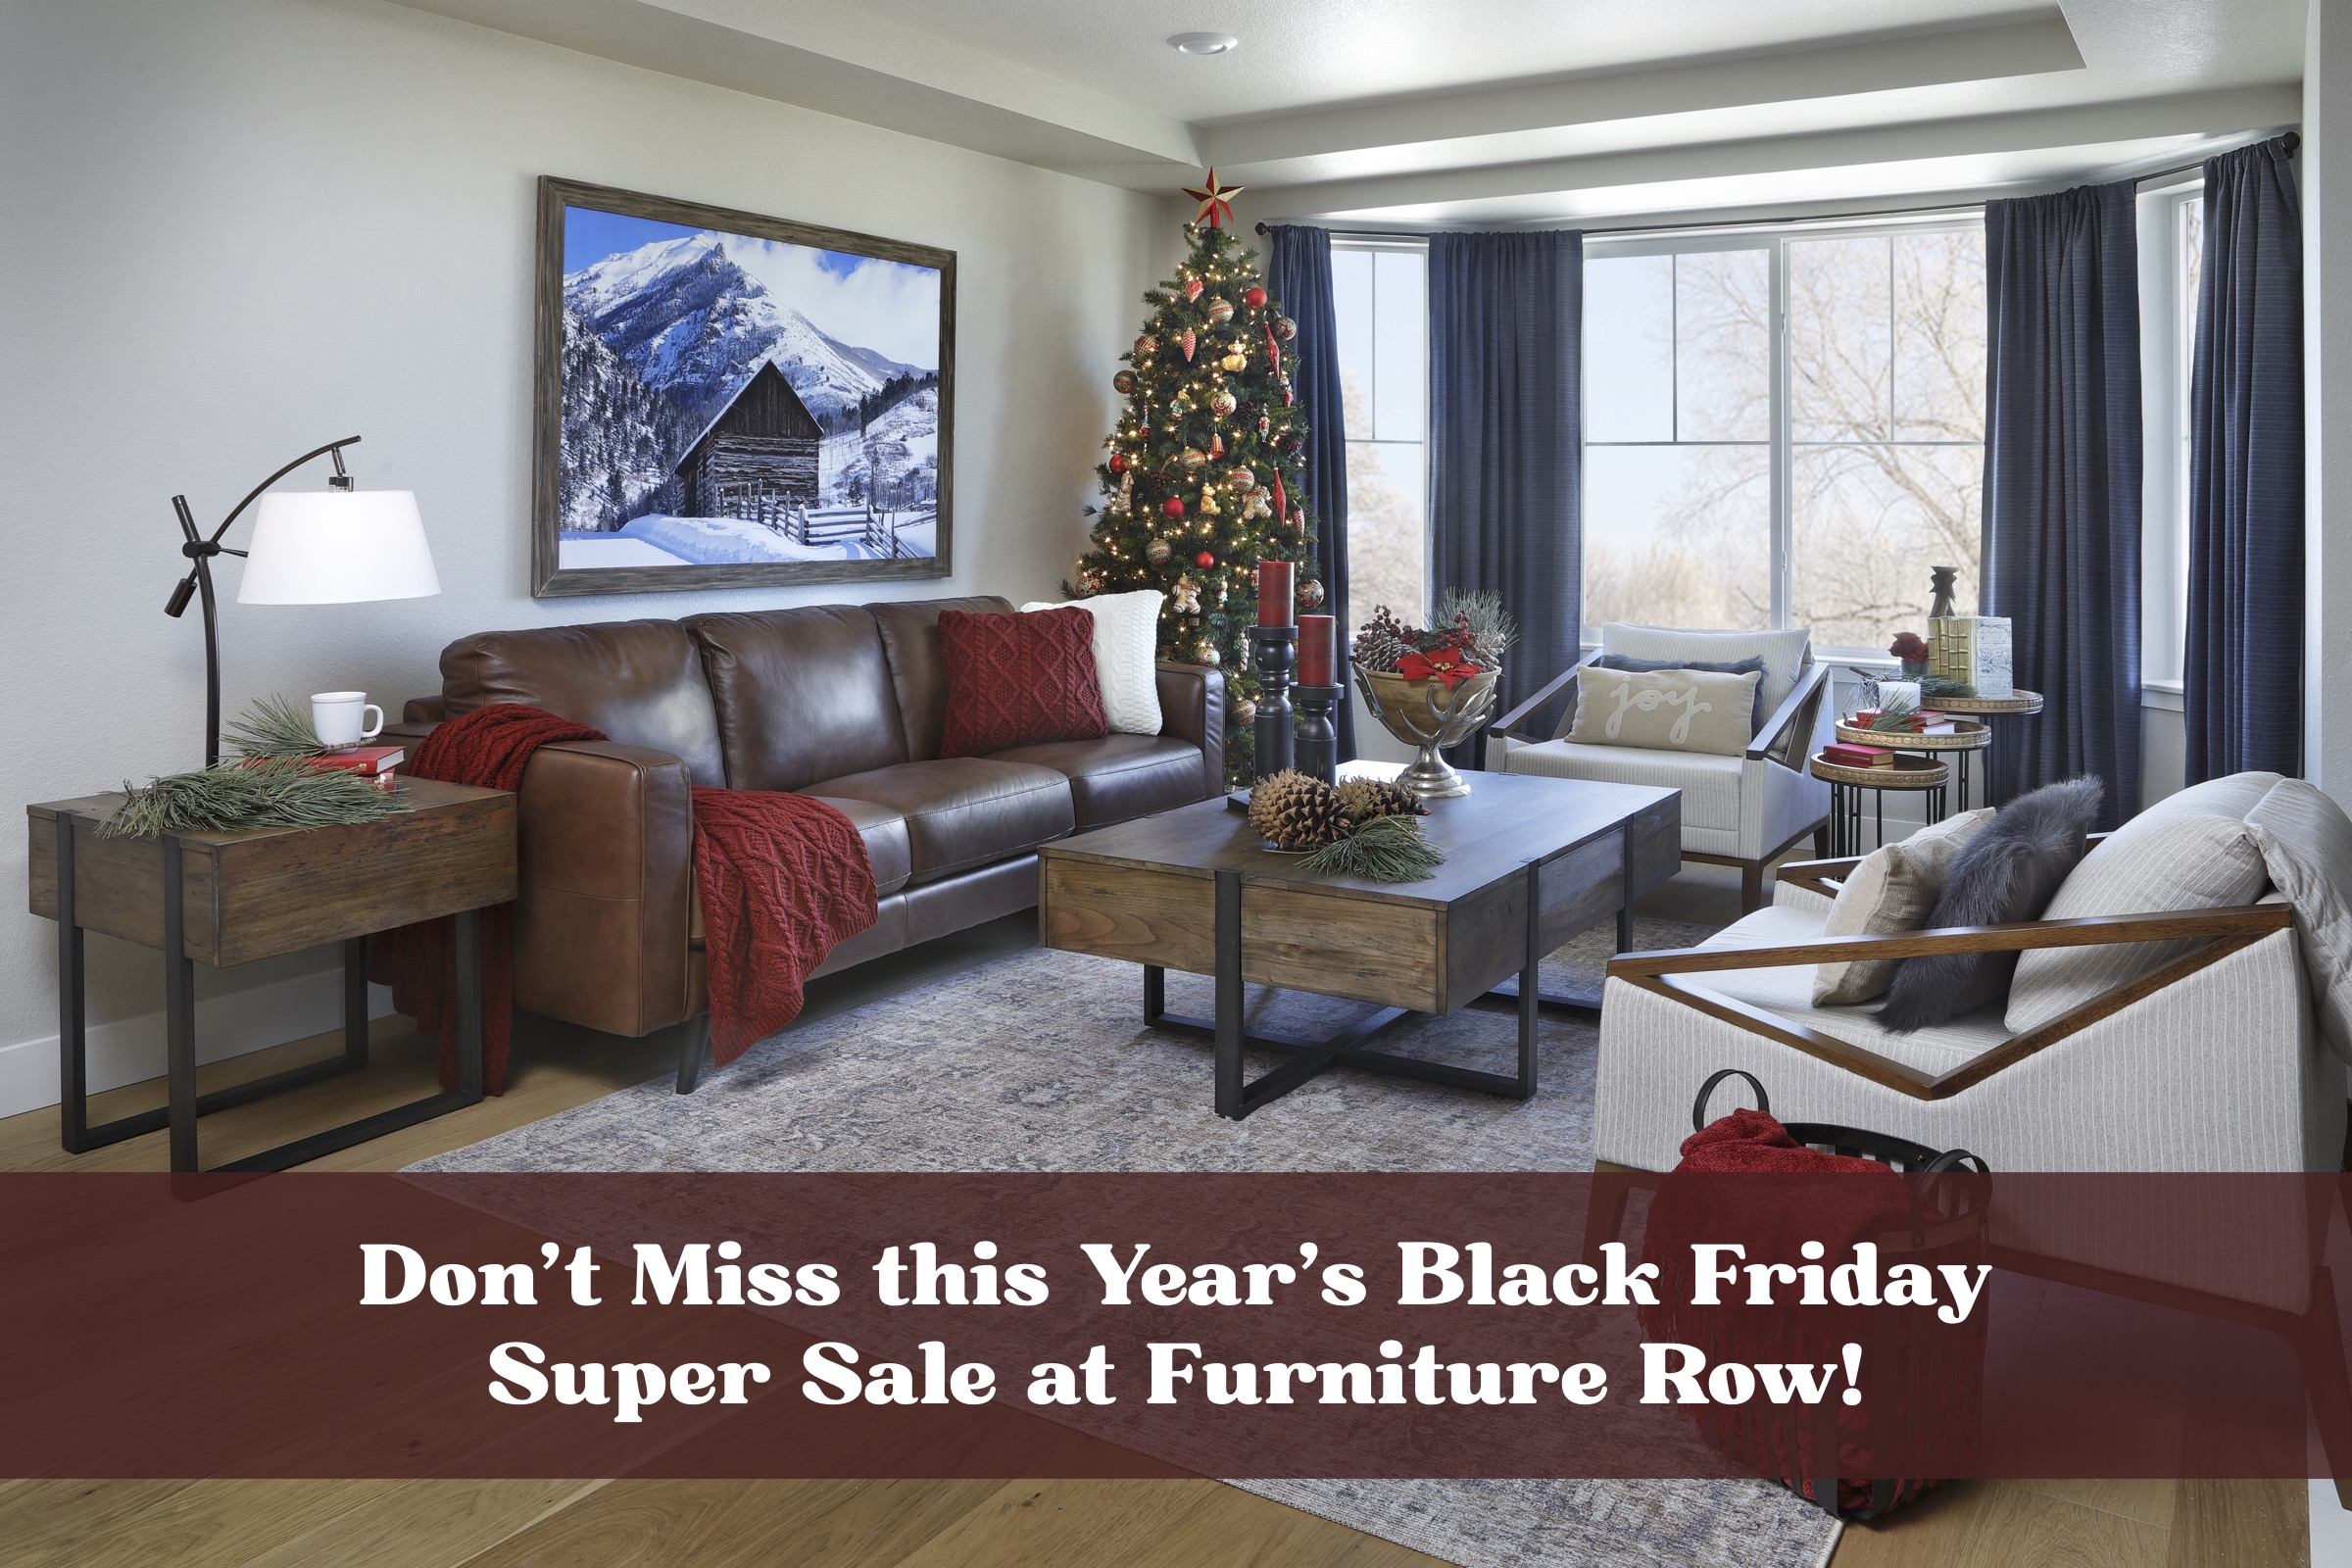 Don’t Miss this Year’s Black Friday Super Sale at Furniture Row!